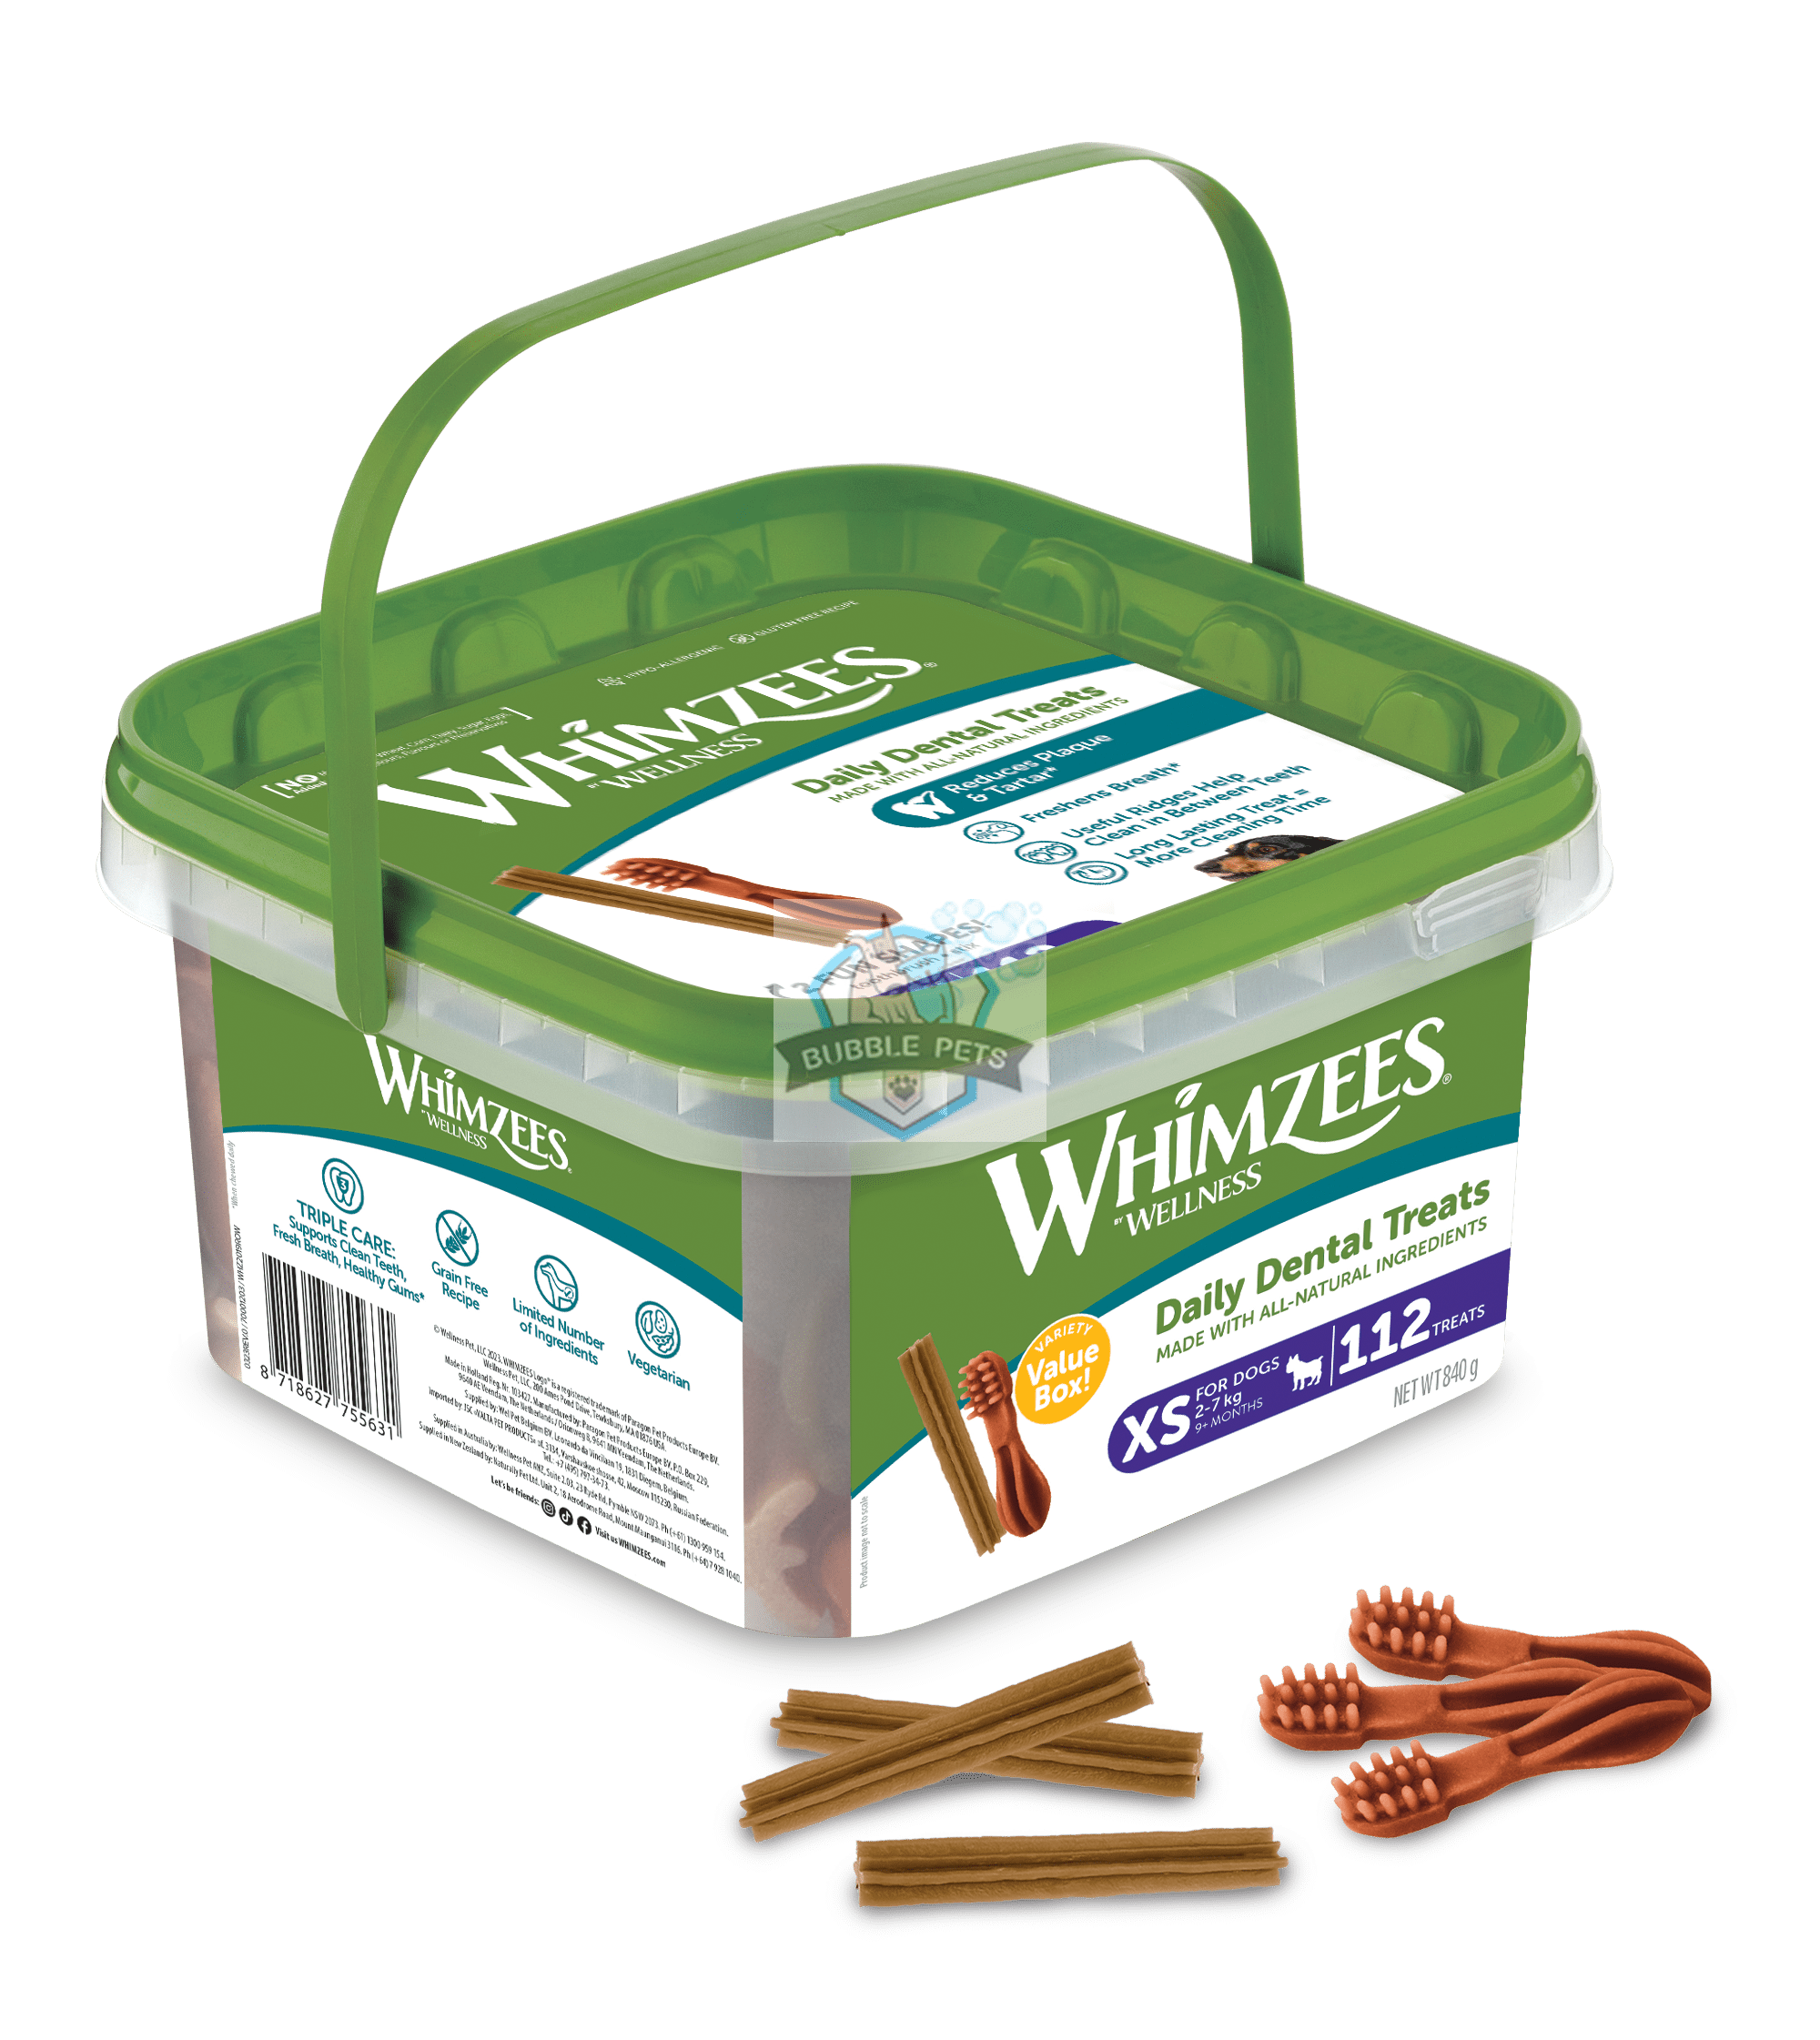 Whimzees Dental Treats for Dogs - Variety Value Box